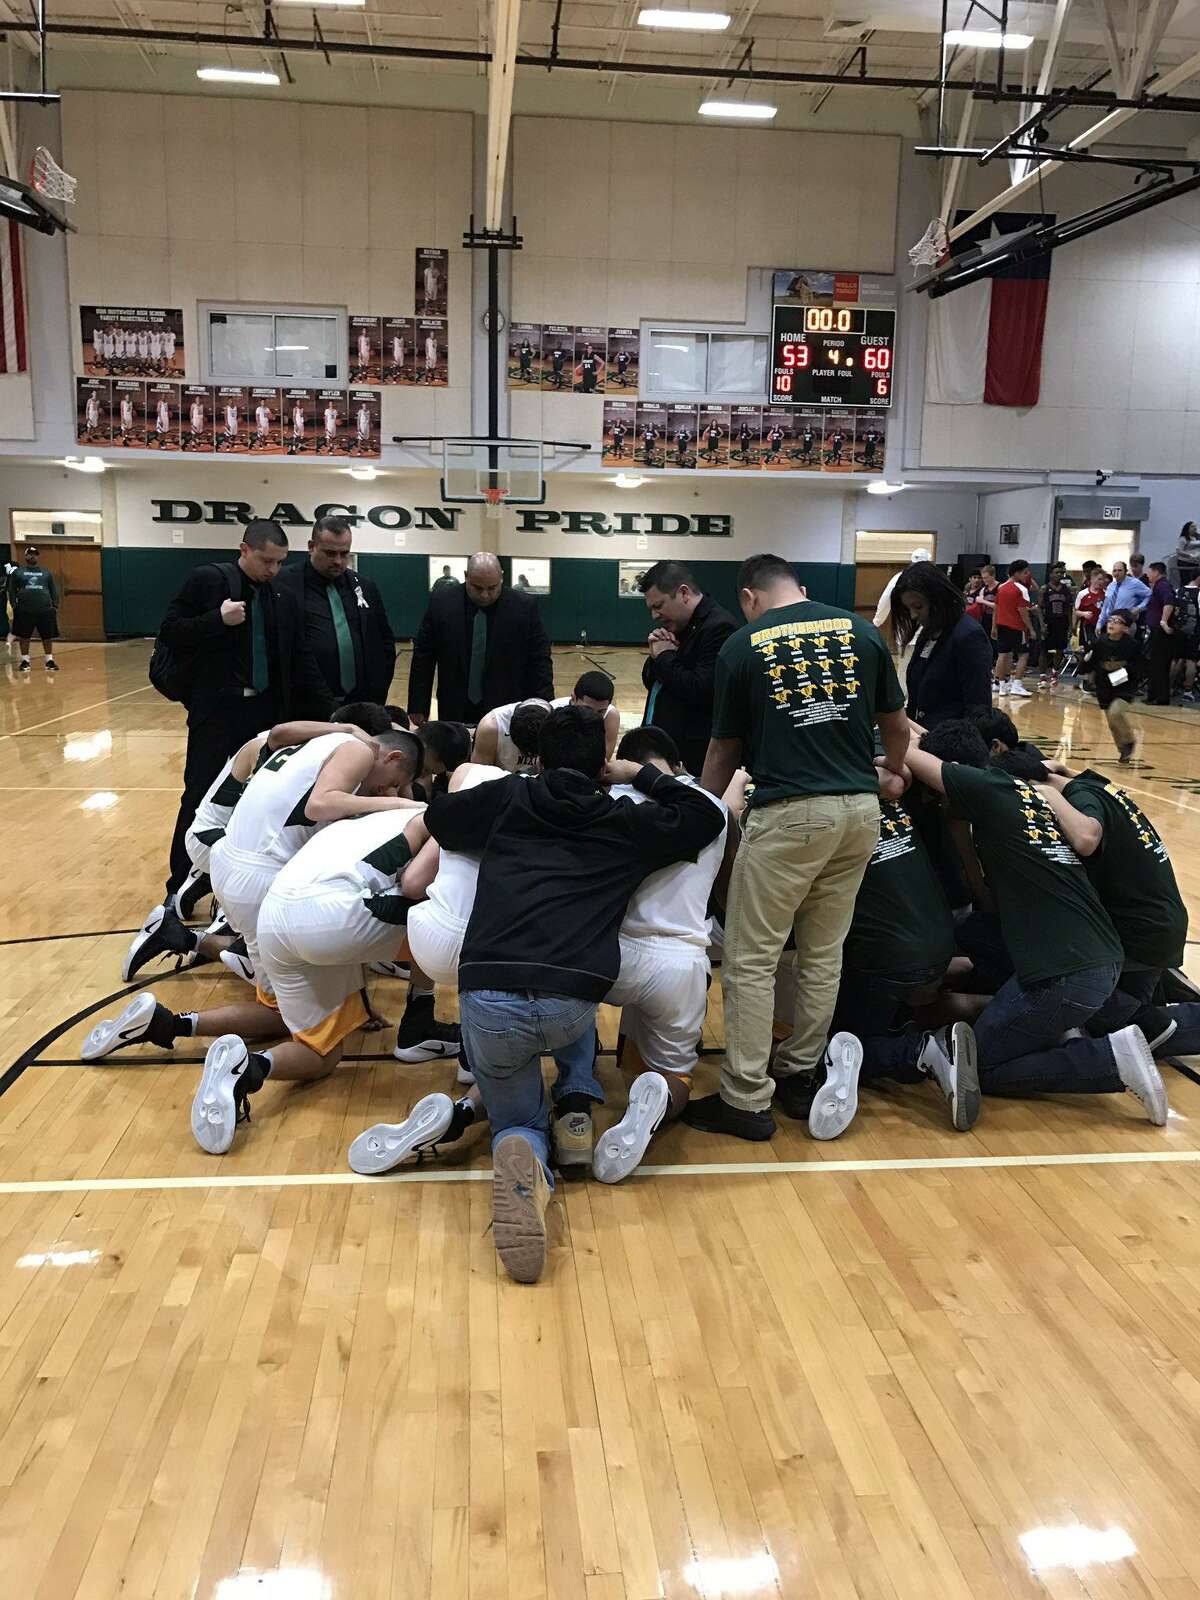 Nixon players react at San Antonio Southwest High School after being eliminated in the second round of the playoffs by CC Veterans Memorial 60-53. The Mustangs had won in the area round the past two seasons.